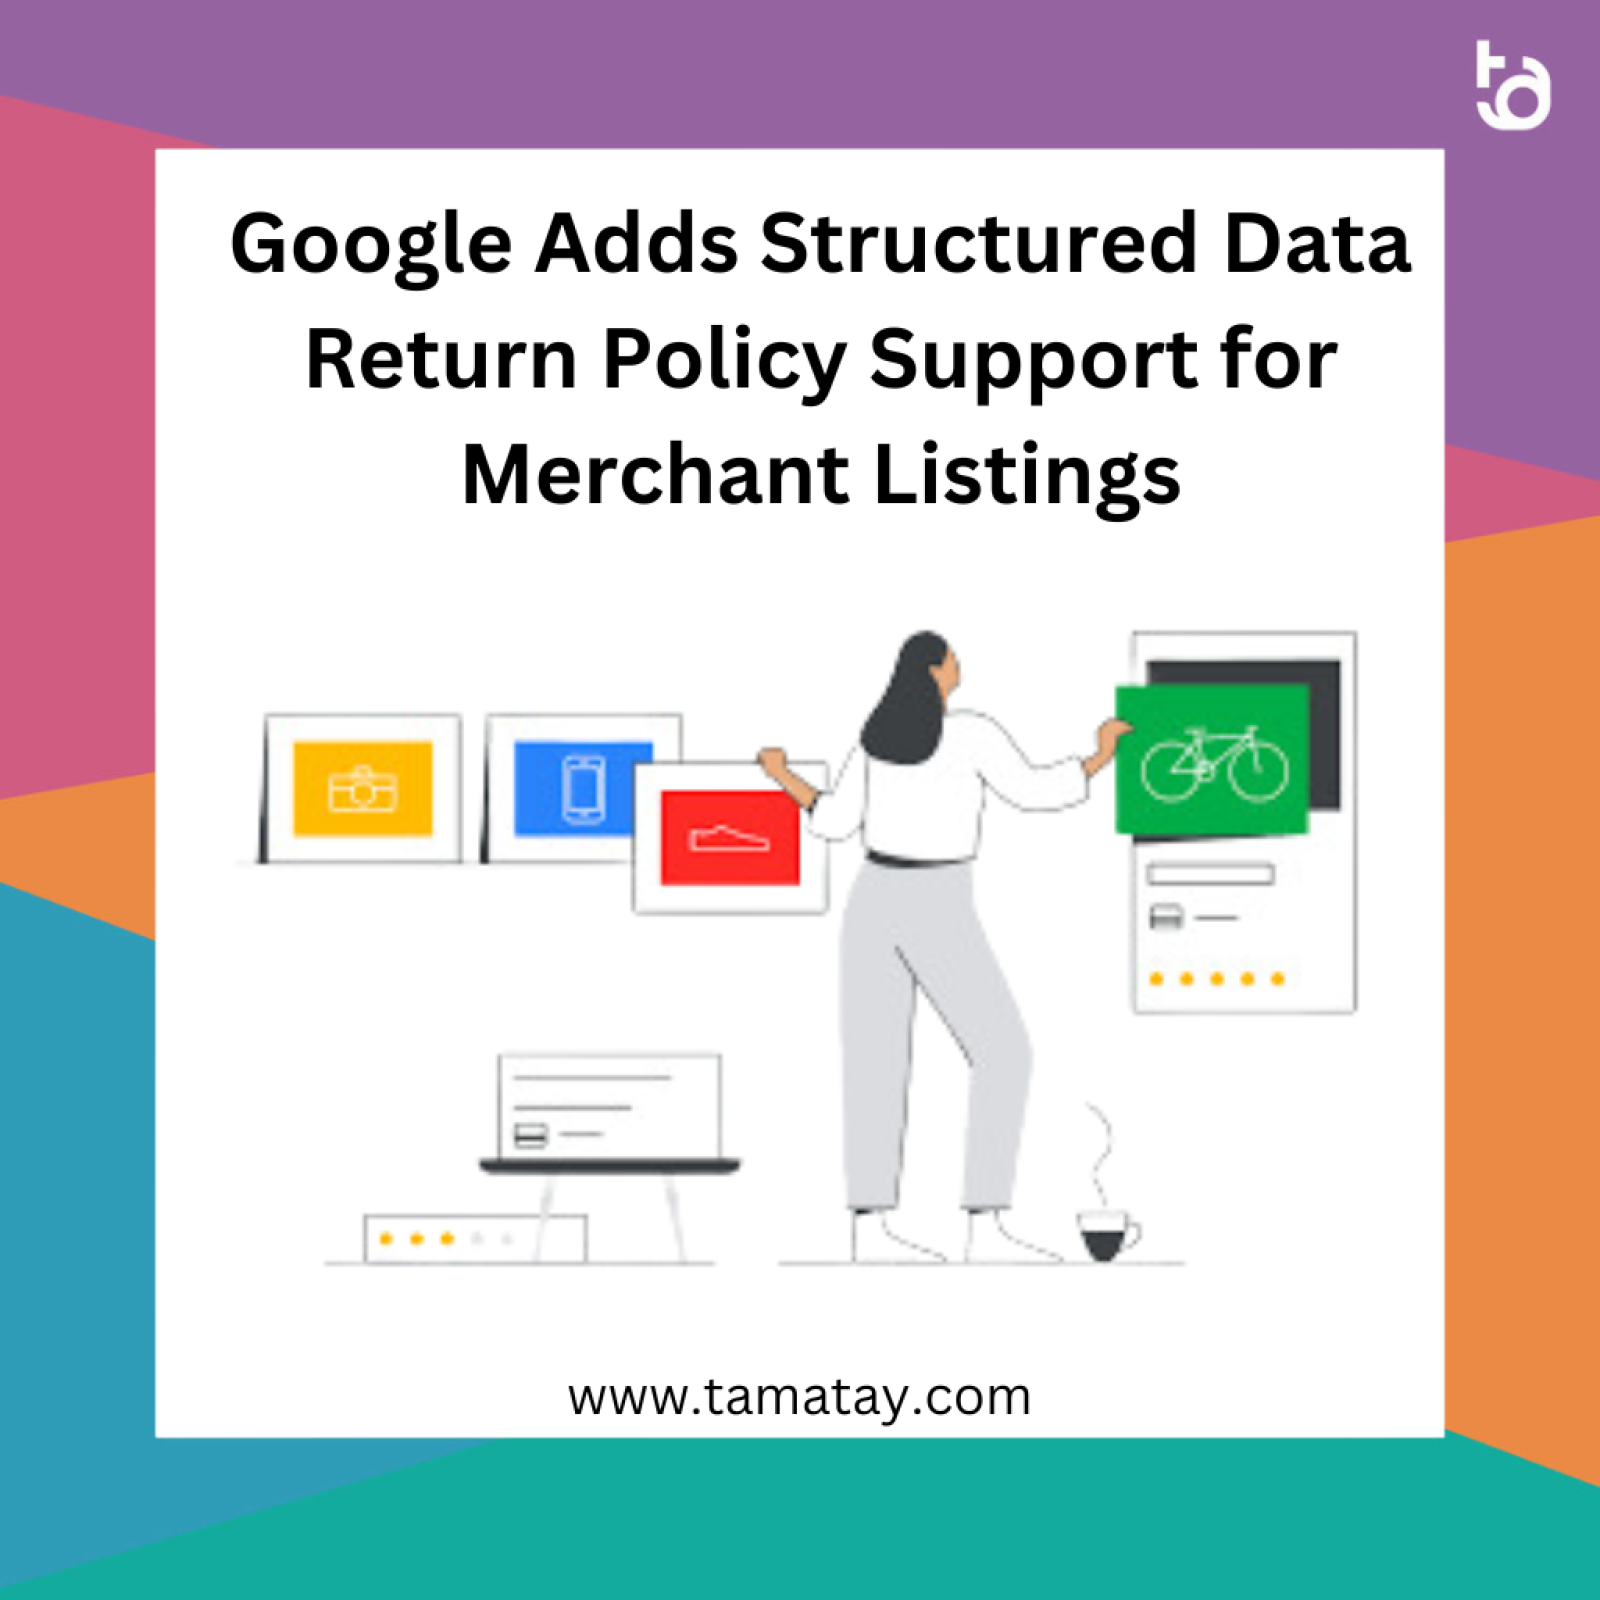 Google Adds Structured Data Return Policy Support for Merchant Listings